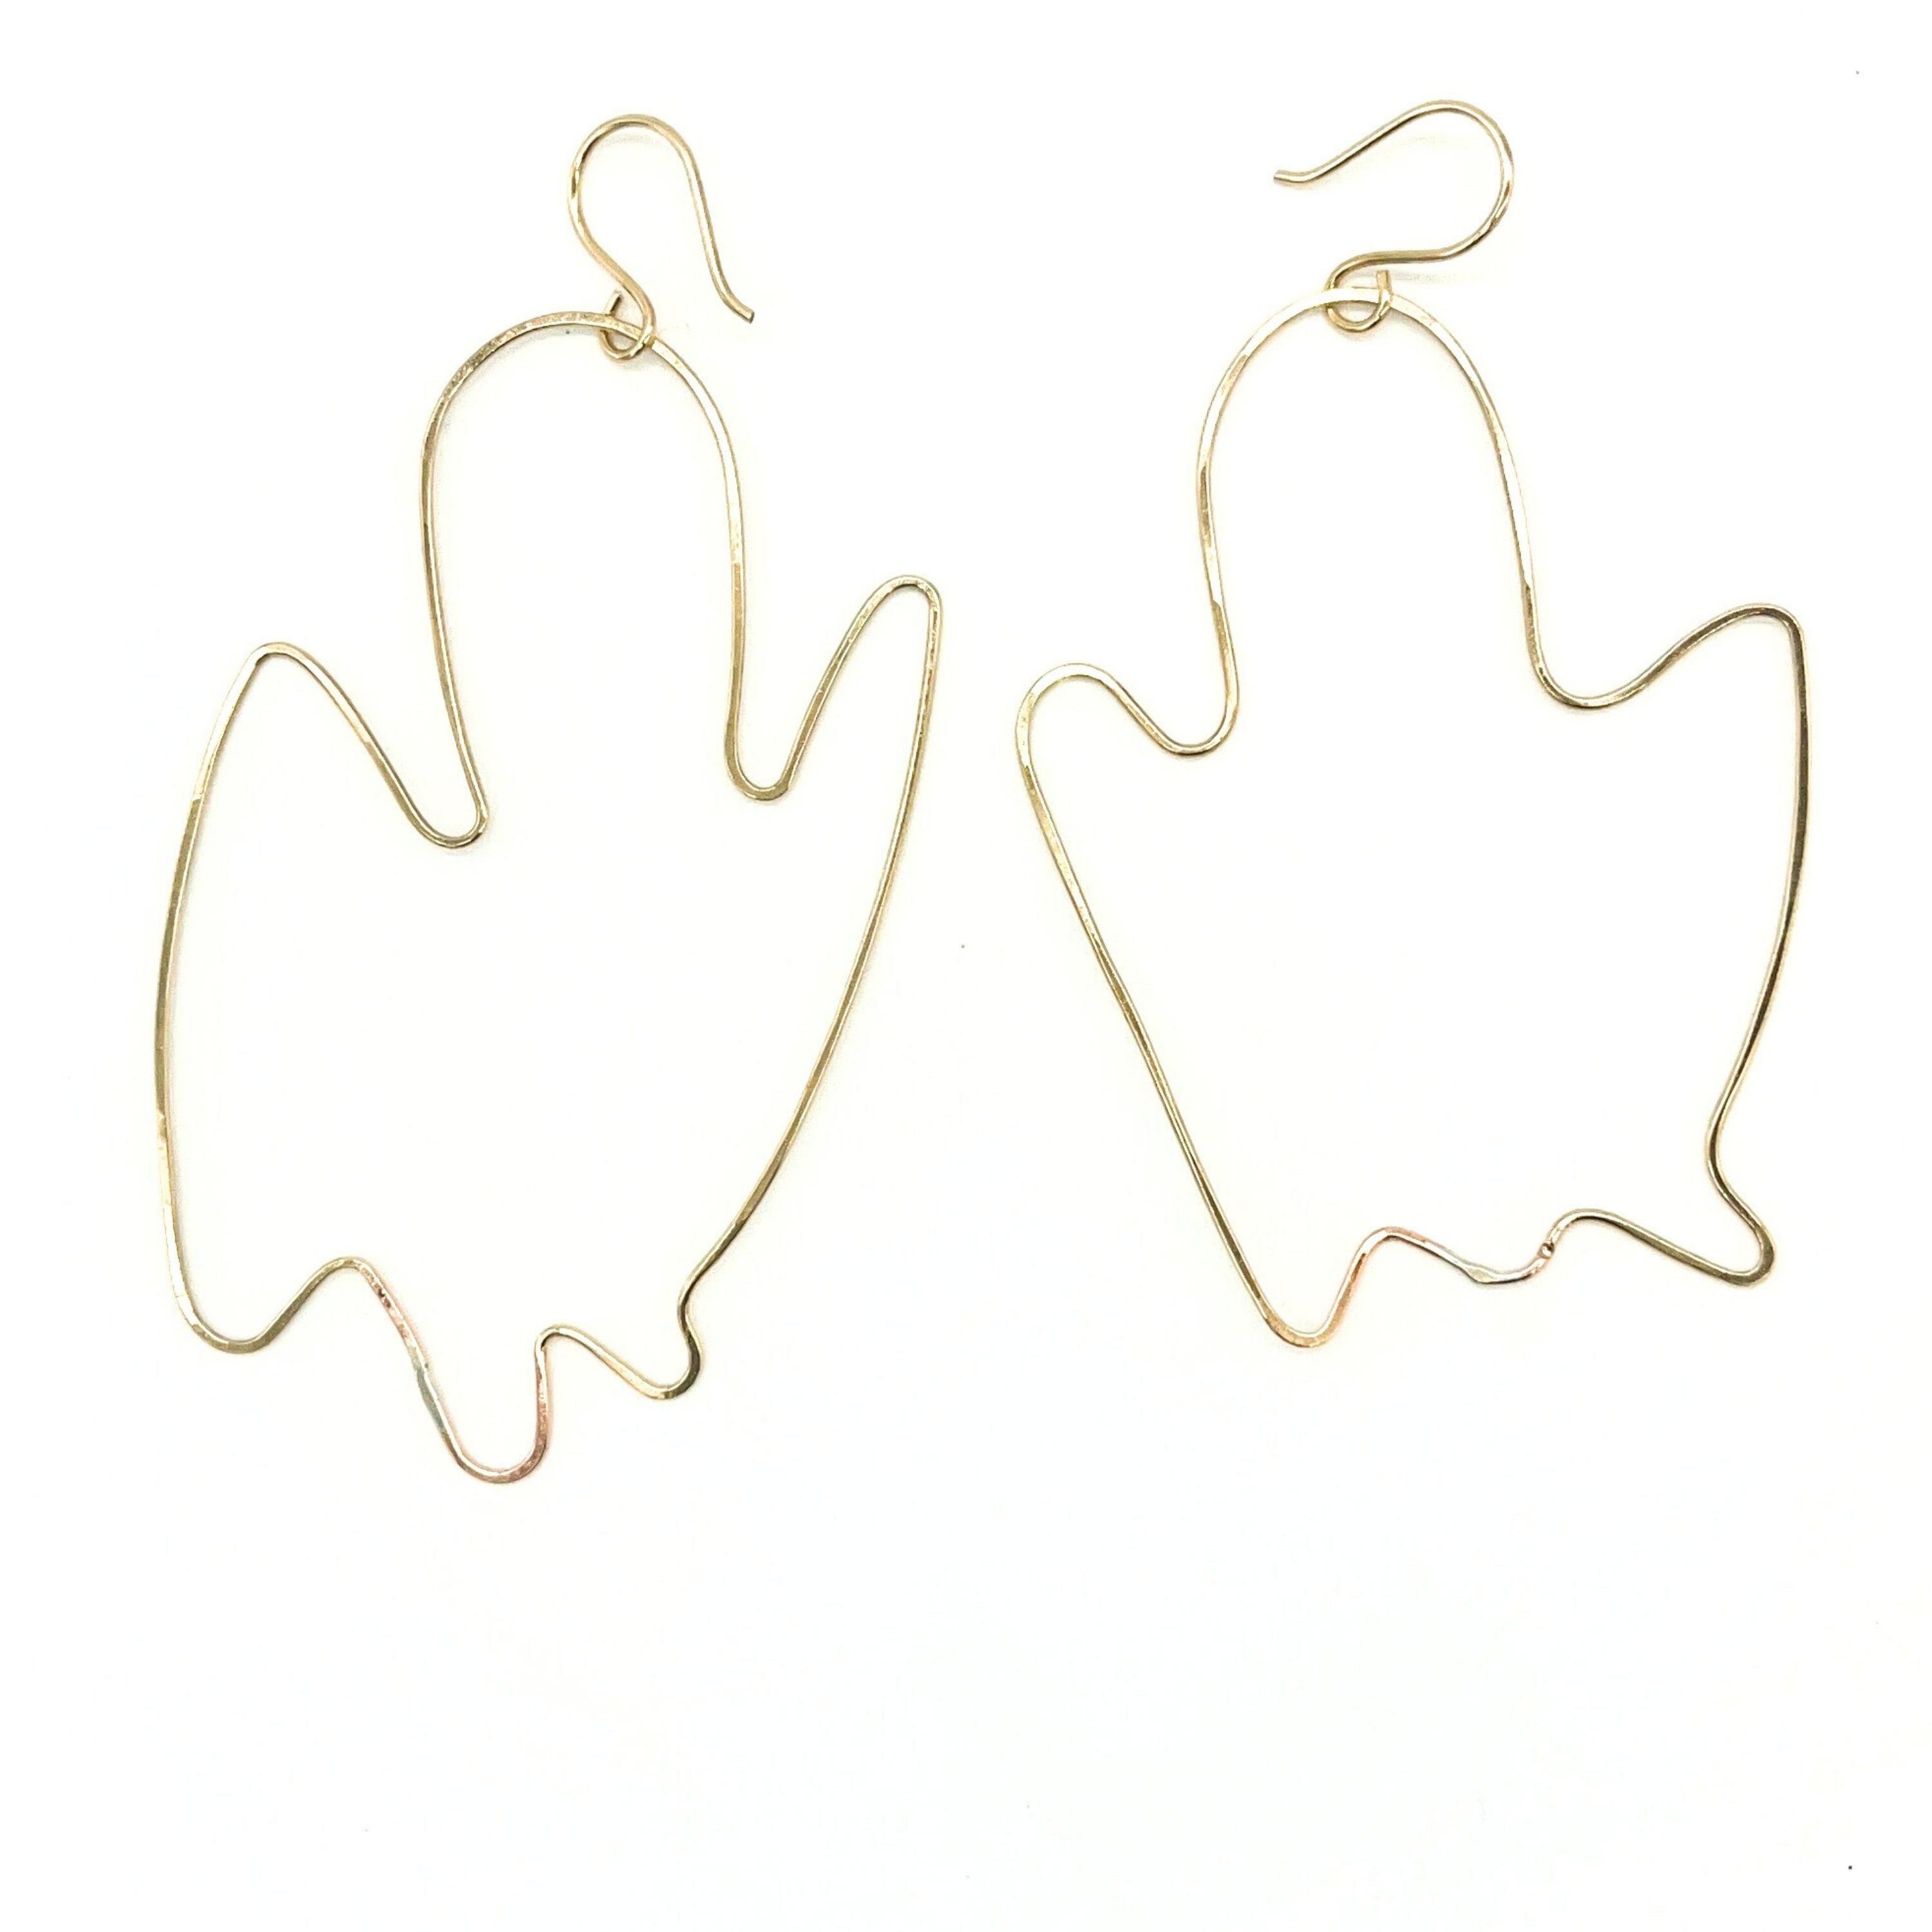 Ghost Earrings - Brass and Argentium Silver Ear Wires - Halloween Limited Earrings